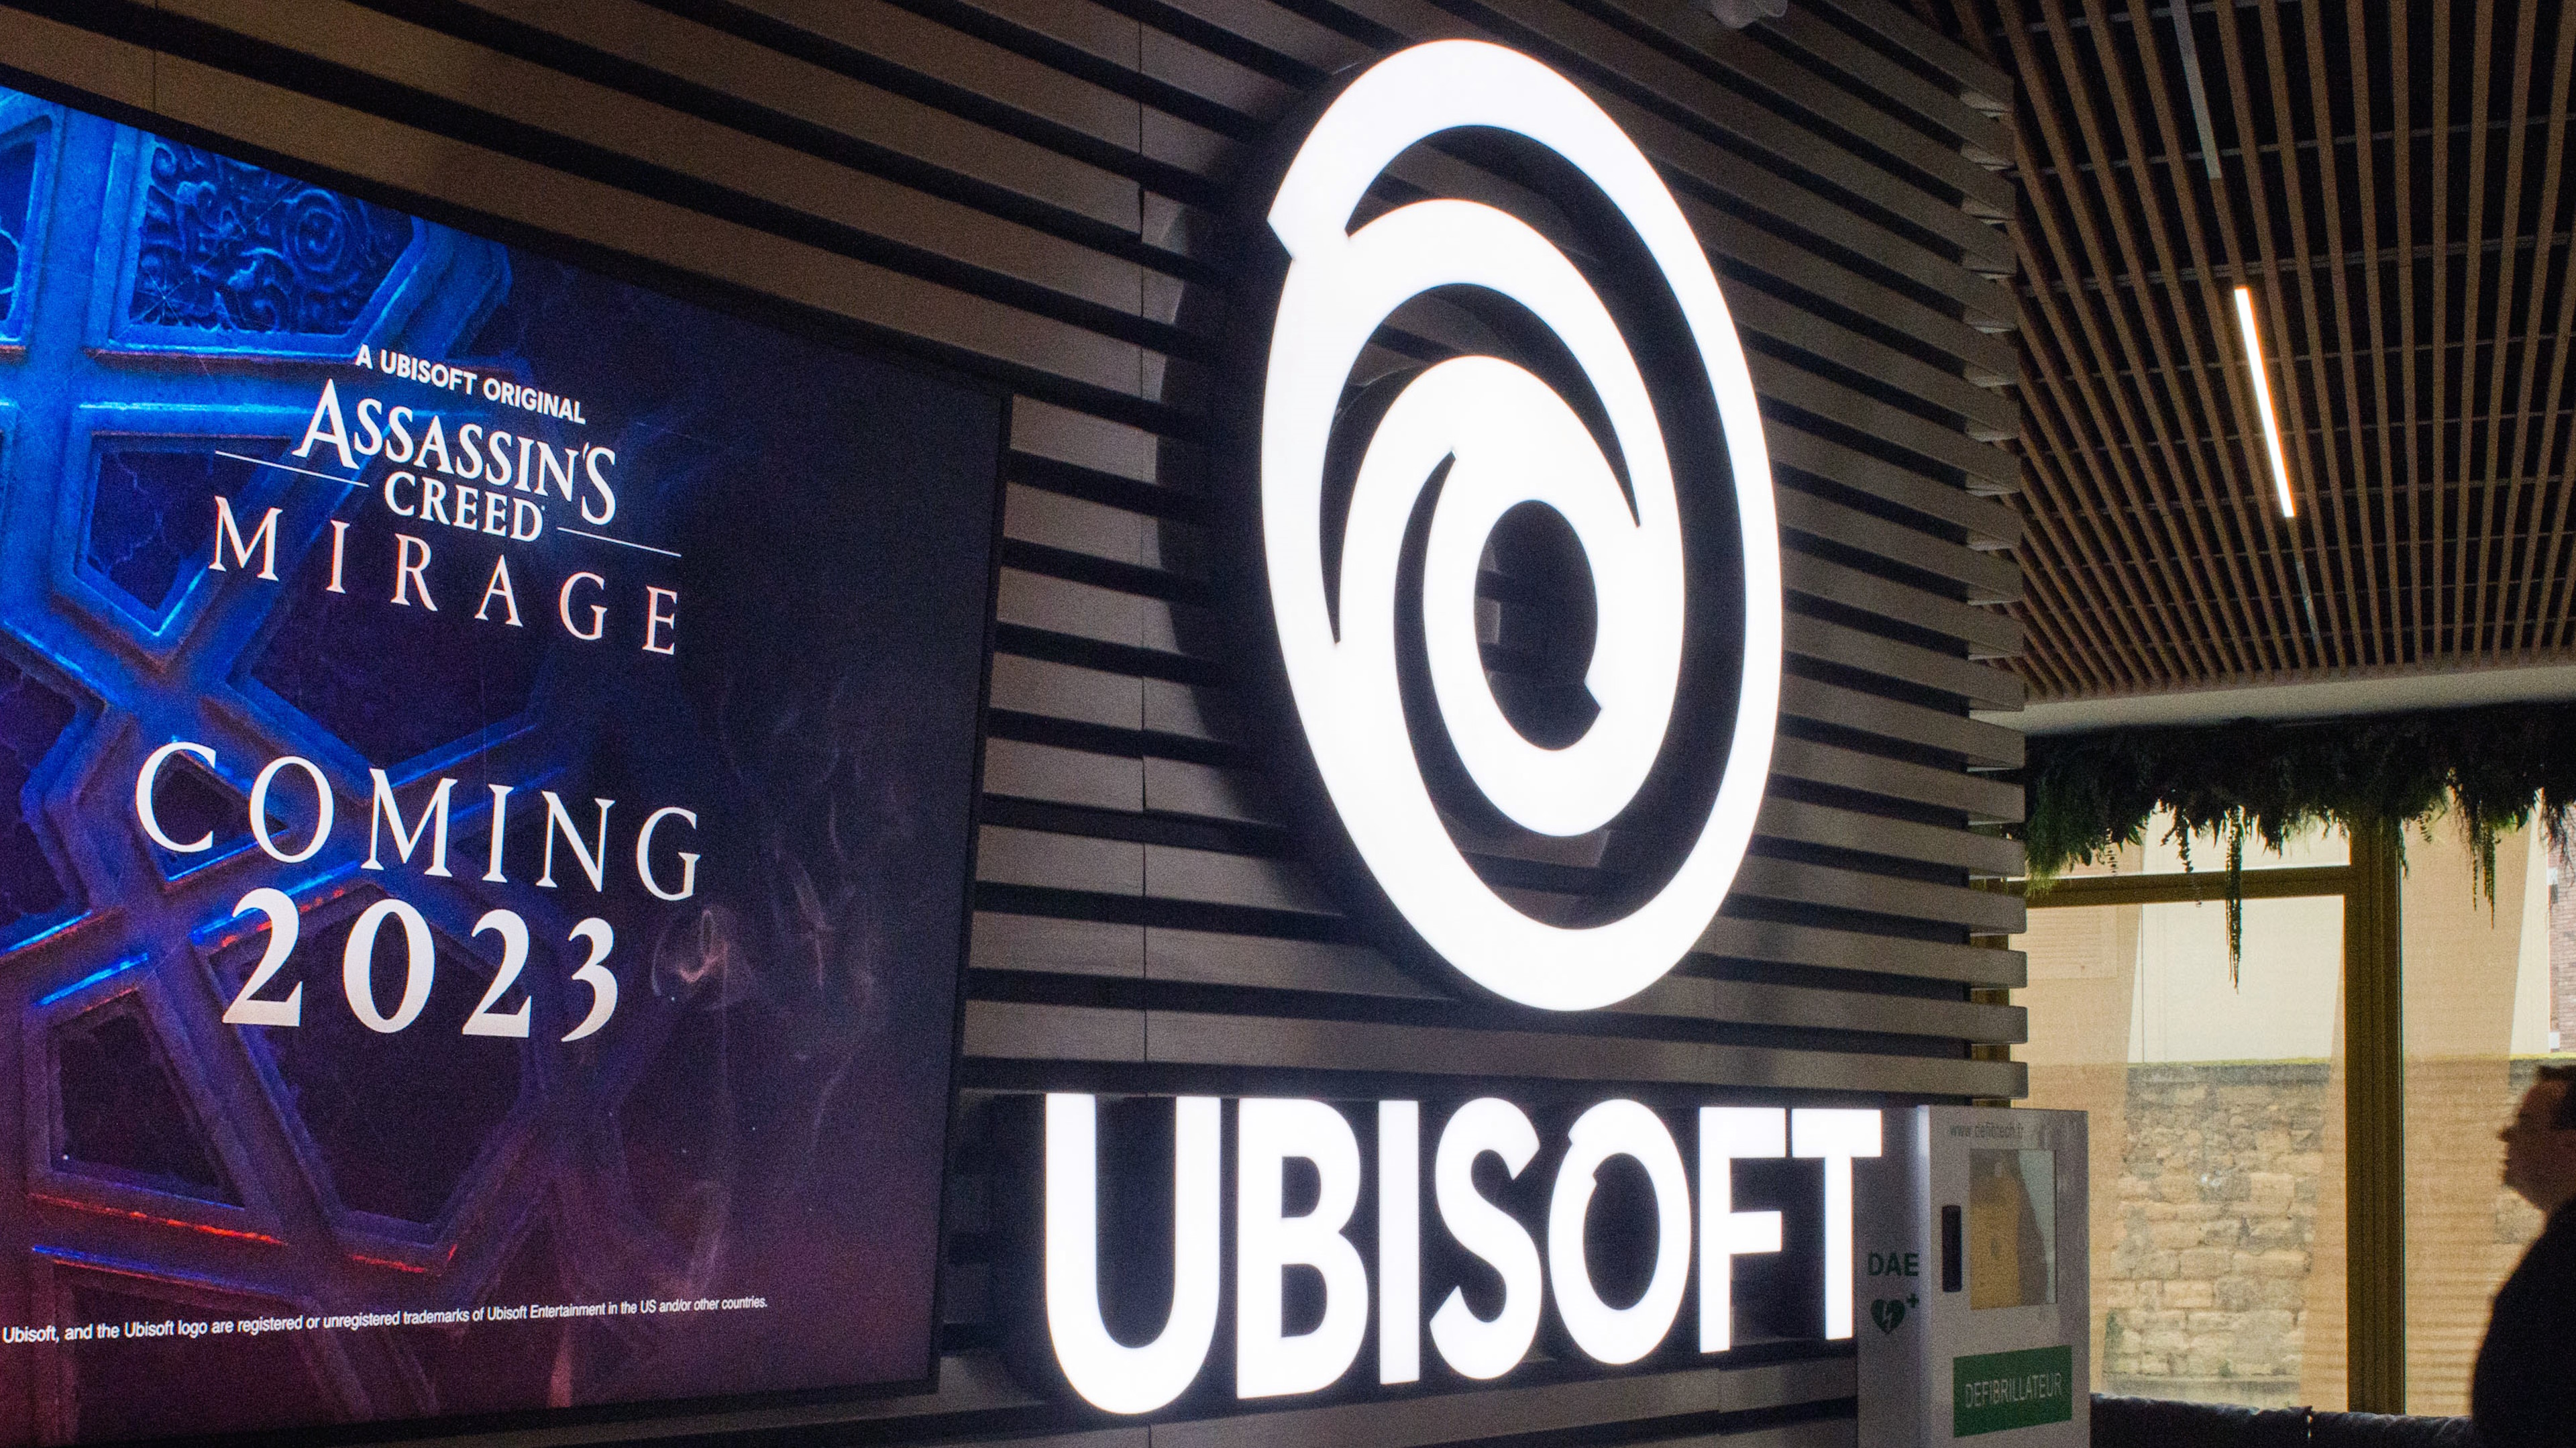  Five former Ubisoft employees arrested following investigation into sexual misconduct complaints at the company 